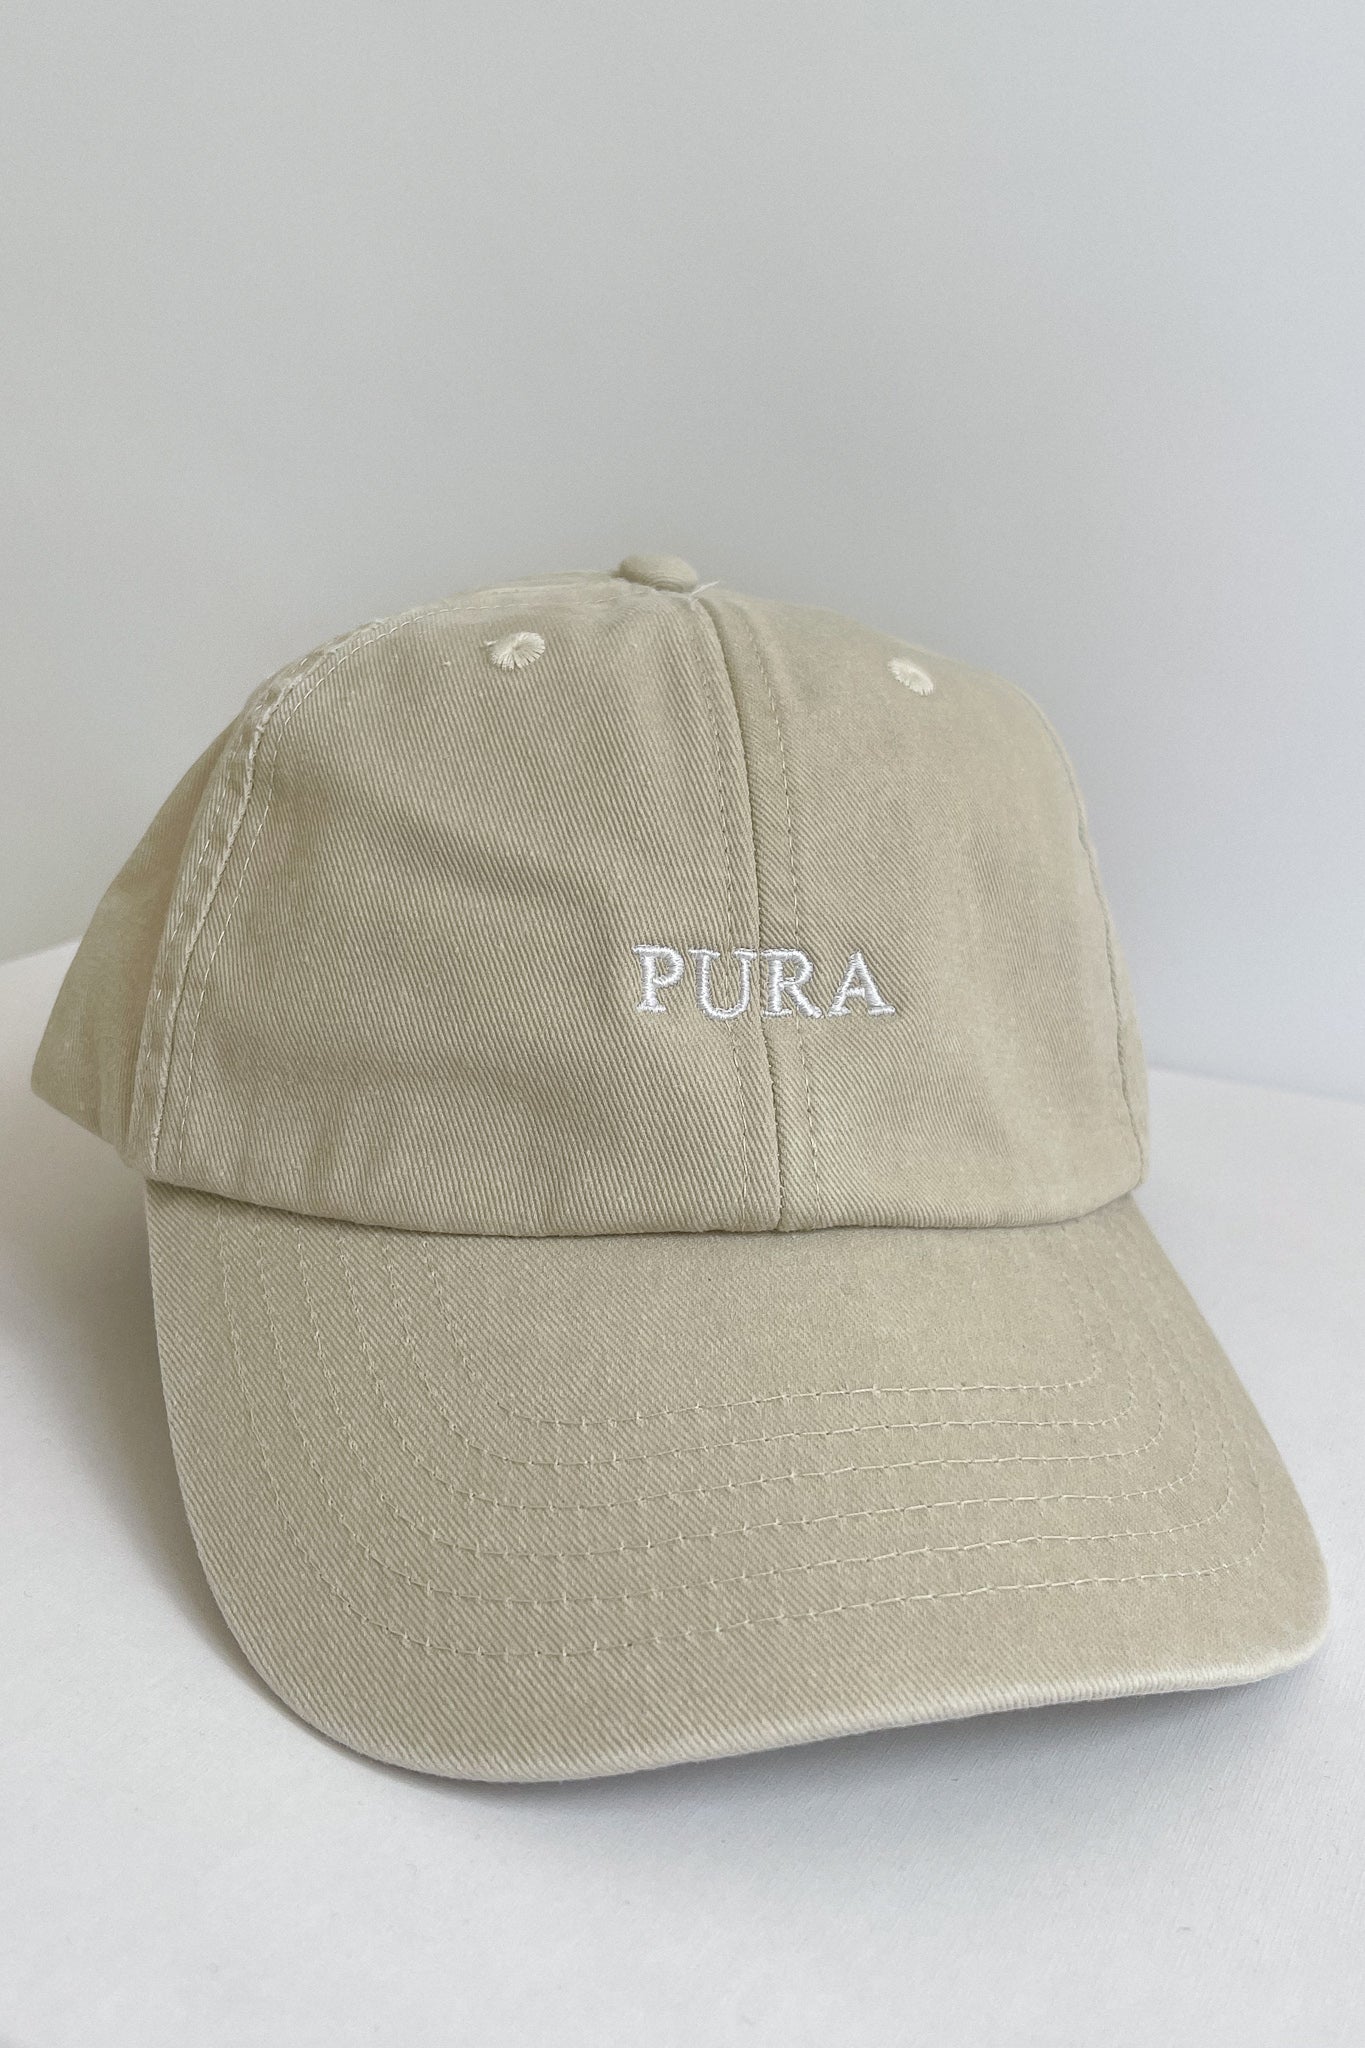 Beige cap THE PURA made of 100% organic cotton by Pura Clothing